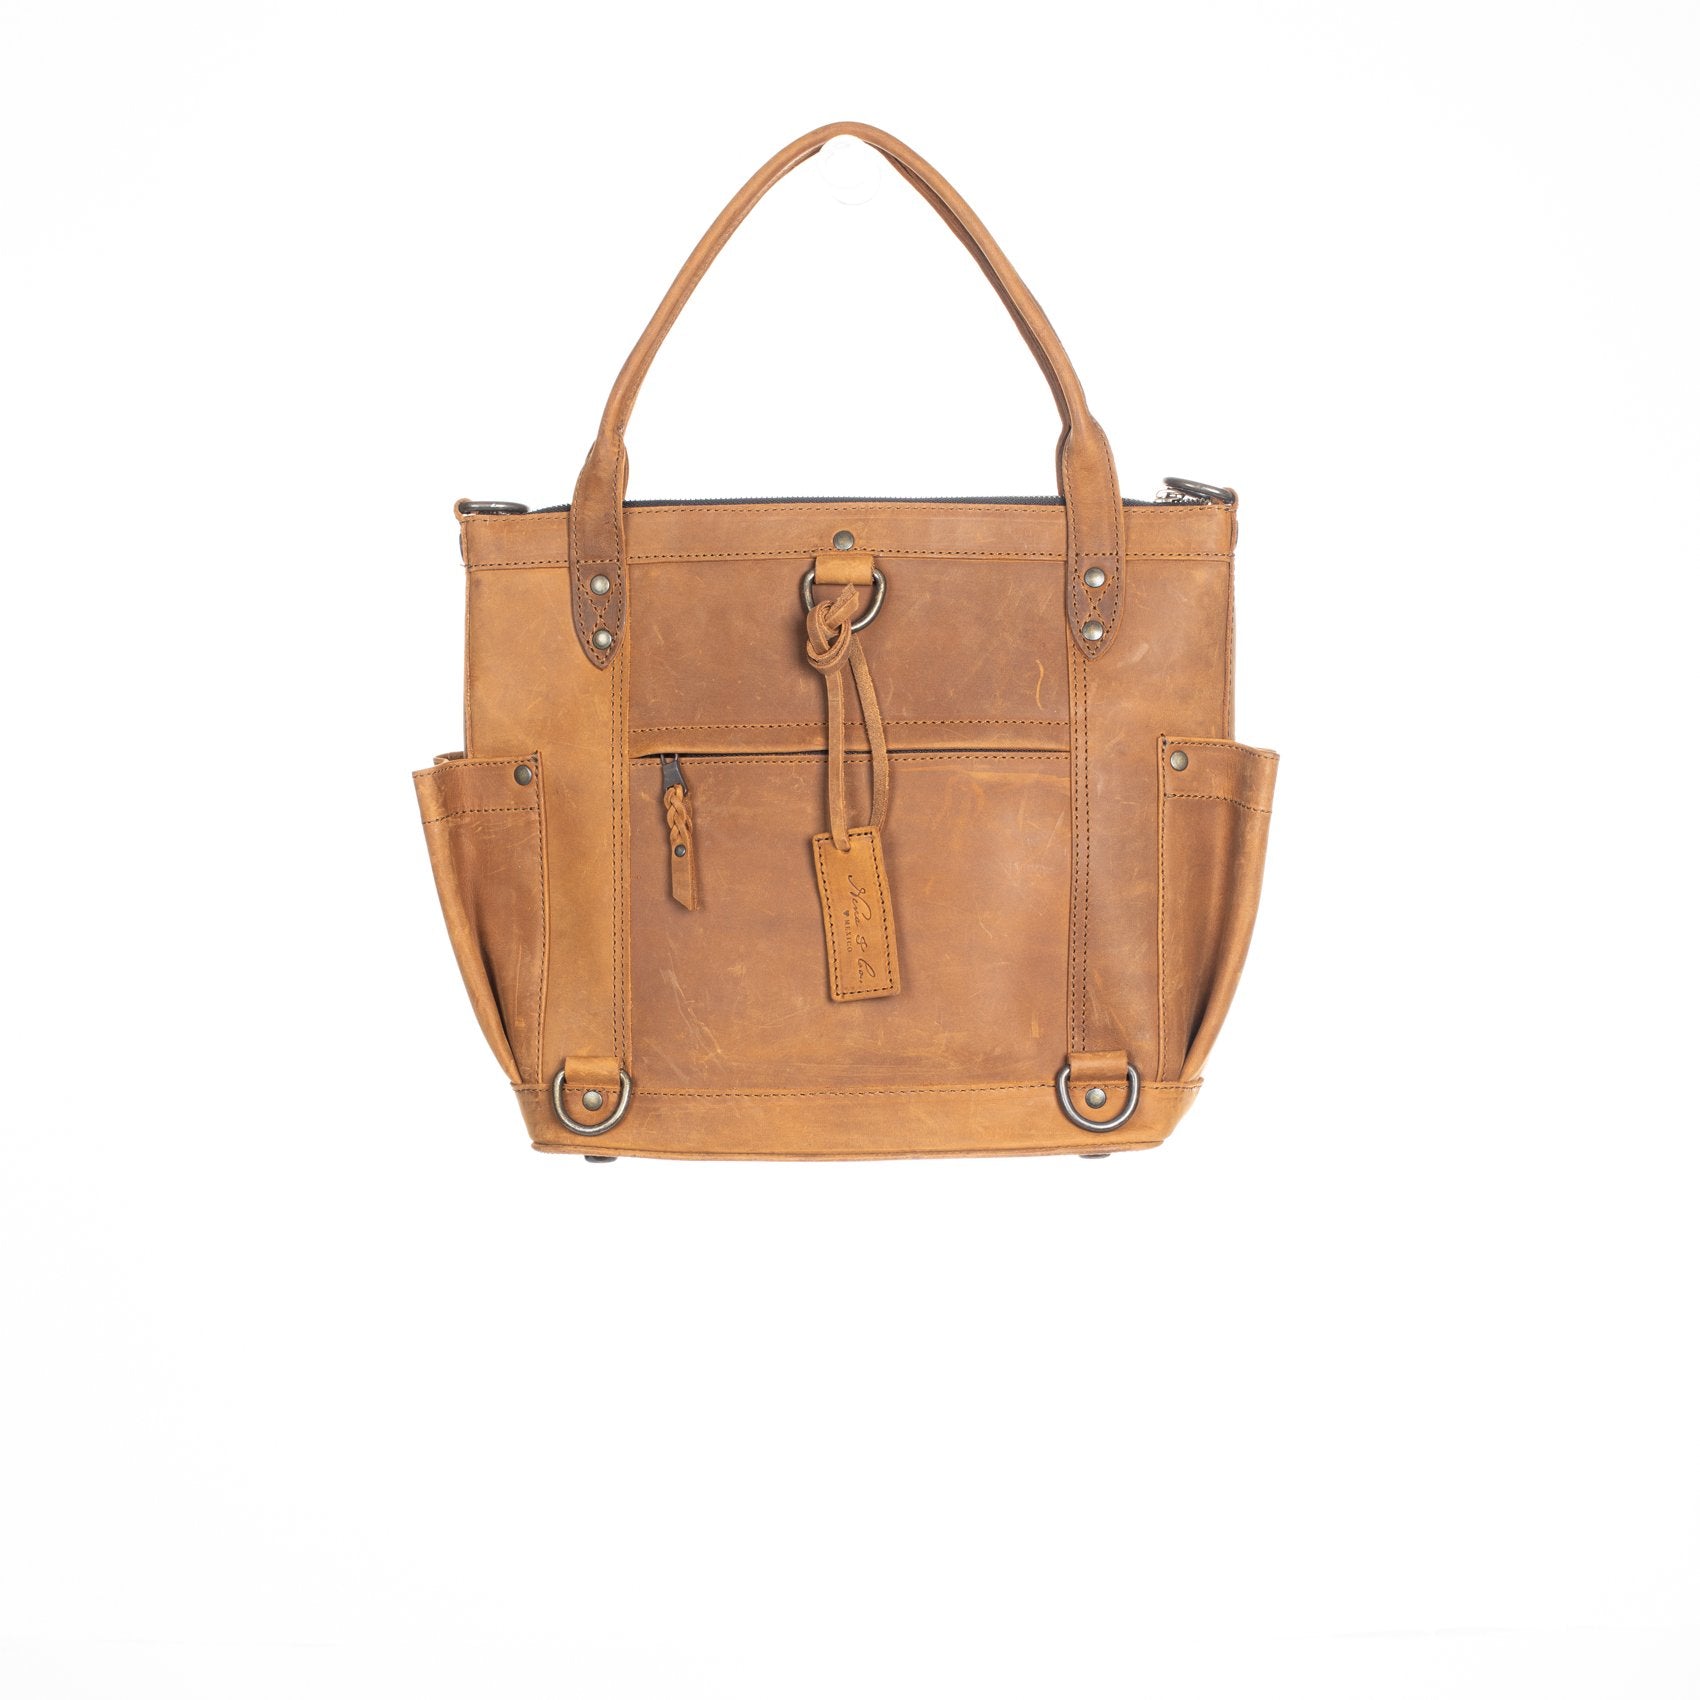 THE PERFECT BAG MEDIUM - MEXICO COLLECTION - HANDWOVEN FRONT NO. 99162 - TOBACCO LEATHER